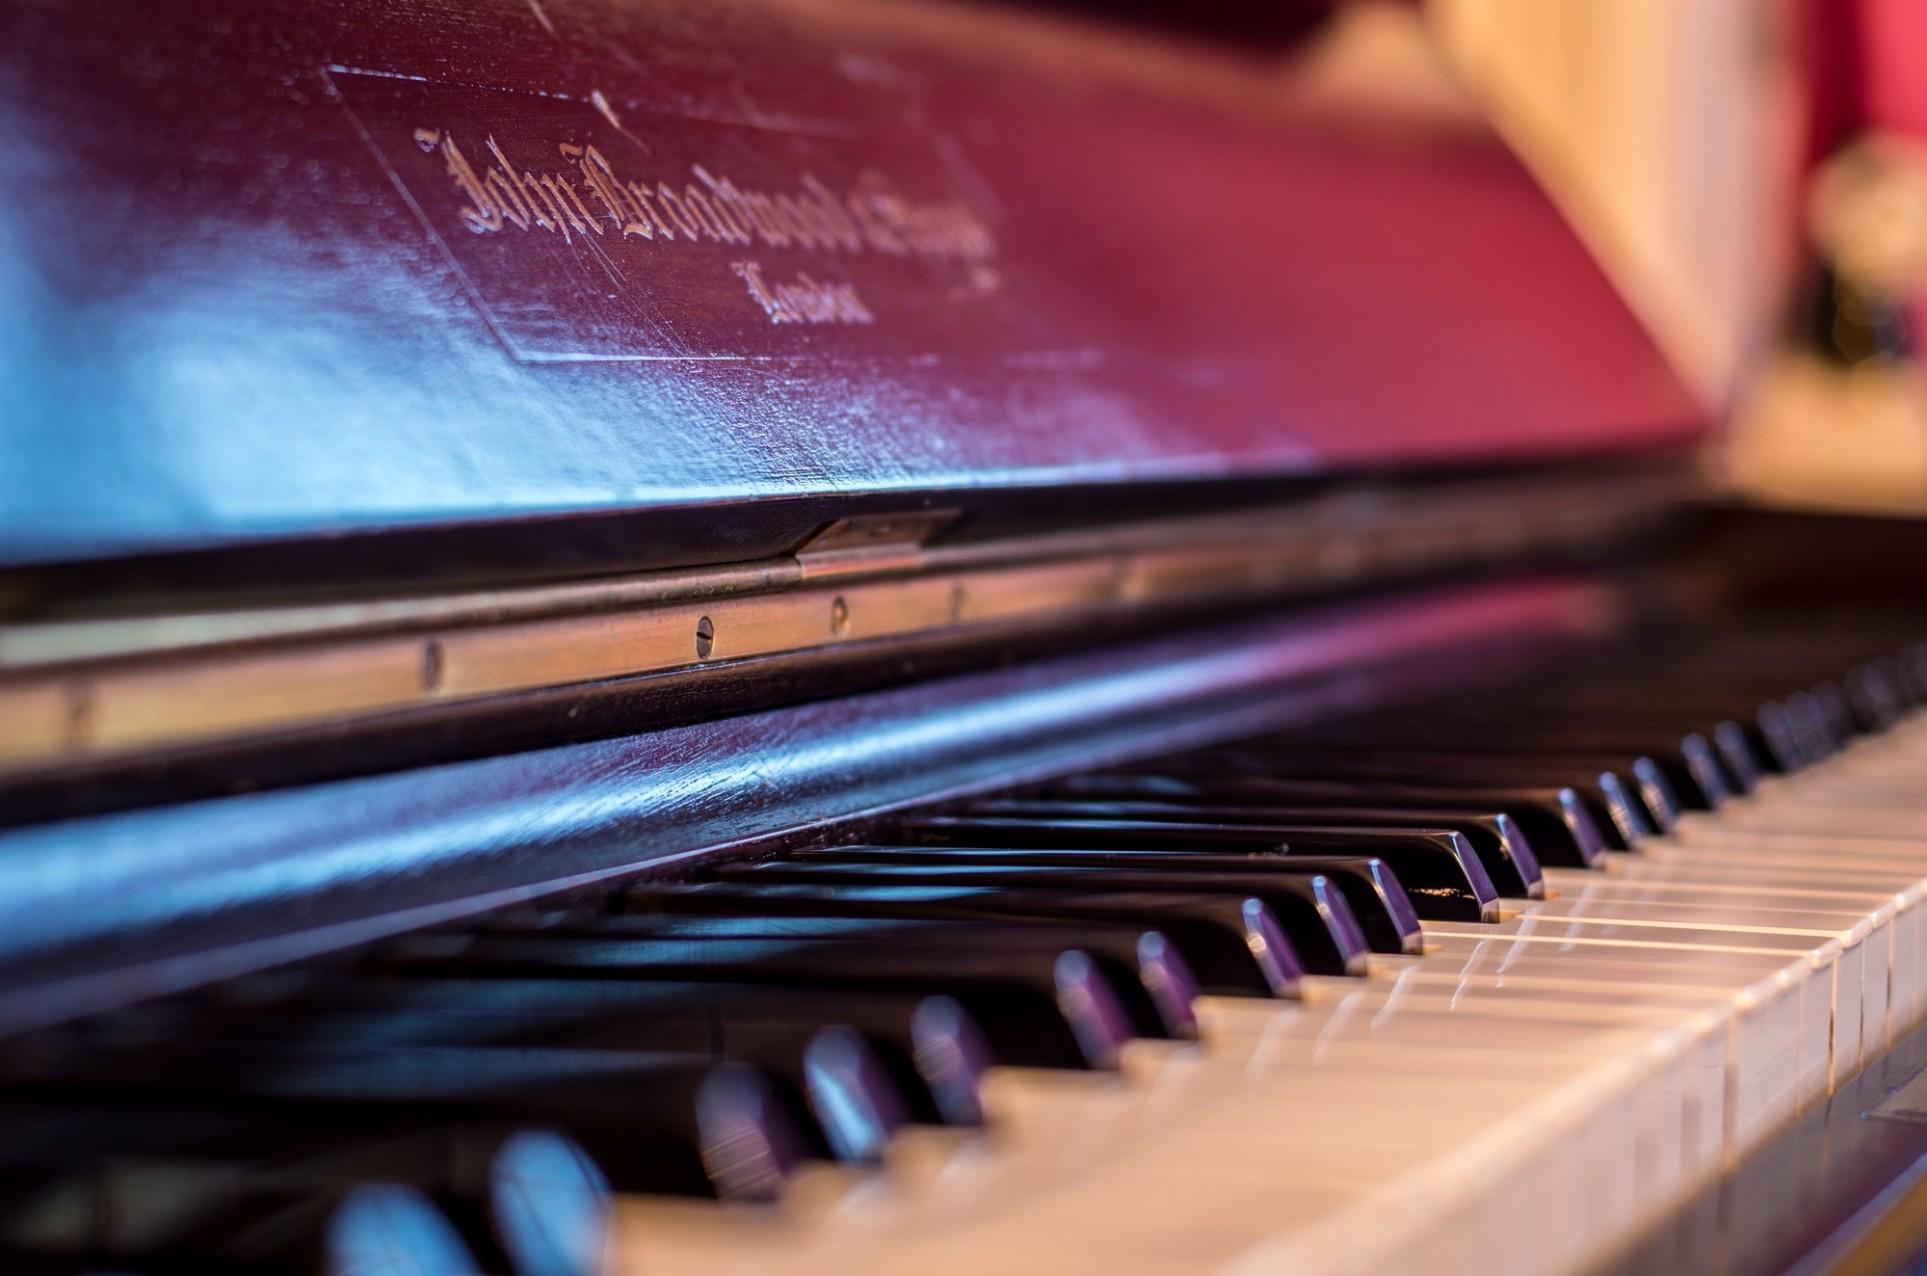 Download 1927x1276 Piano, Close Up, Instrument, Music, Blurred